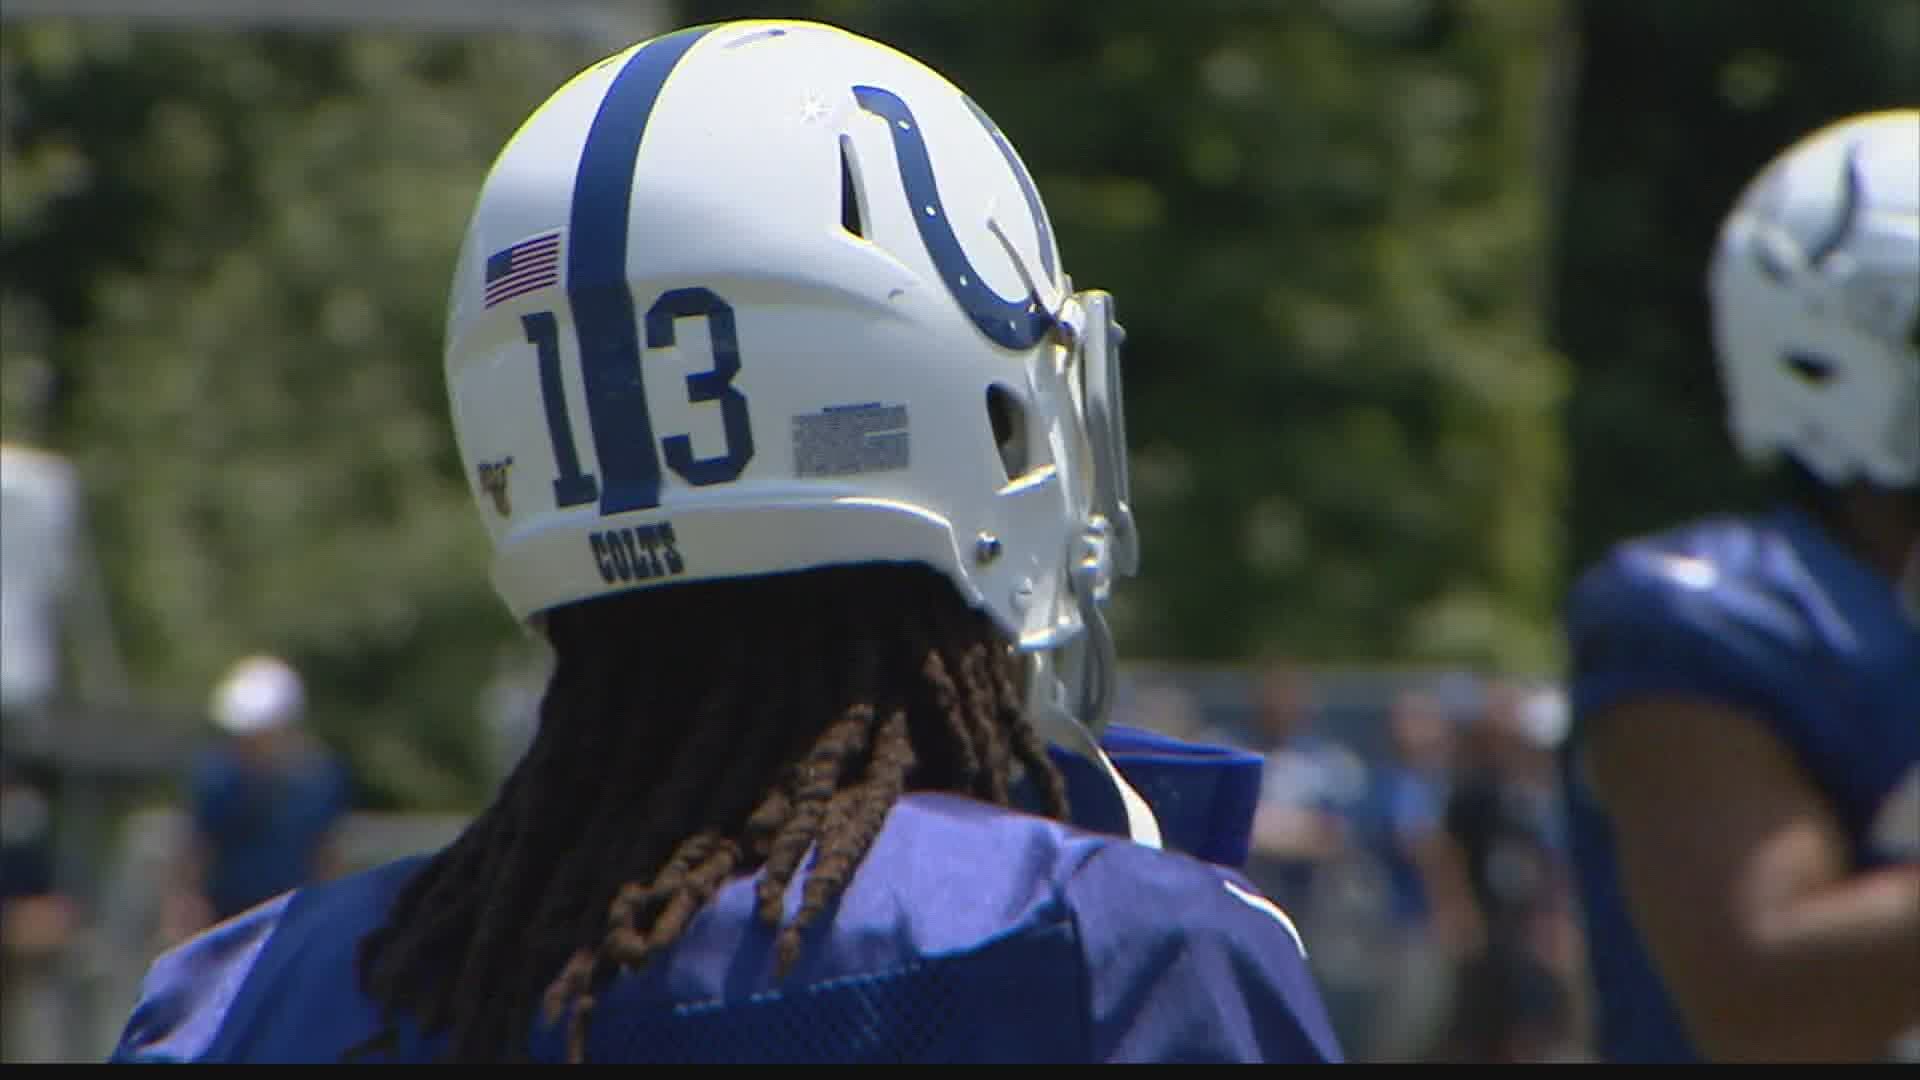 As scheduled, Colts training camp is underway but the first step for players is to get tested for COVID-19.